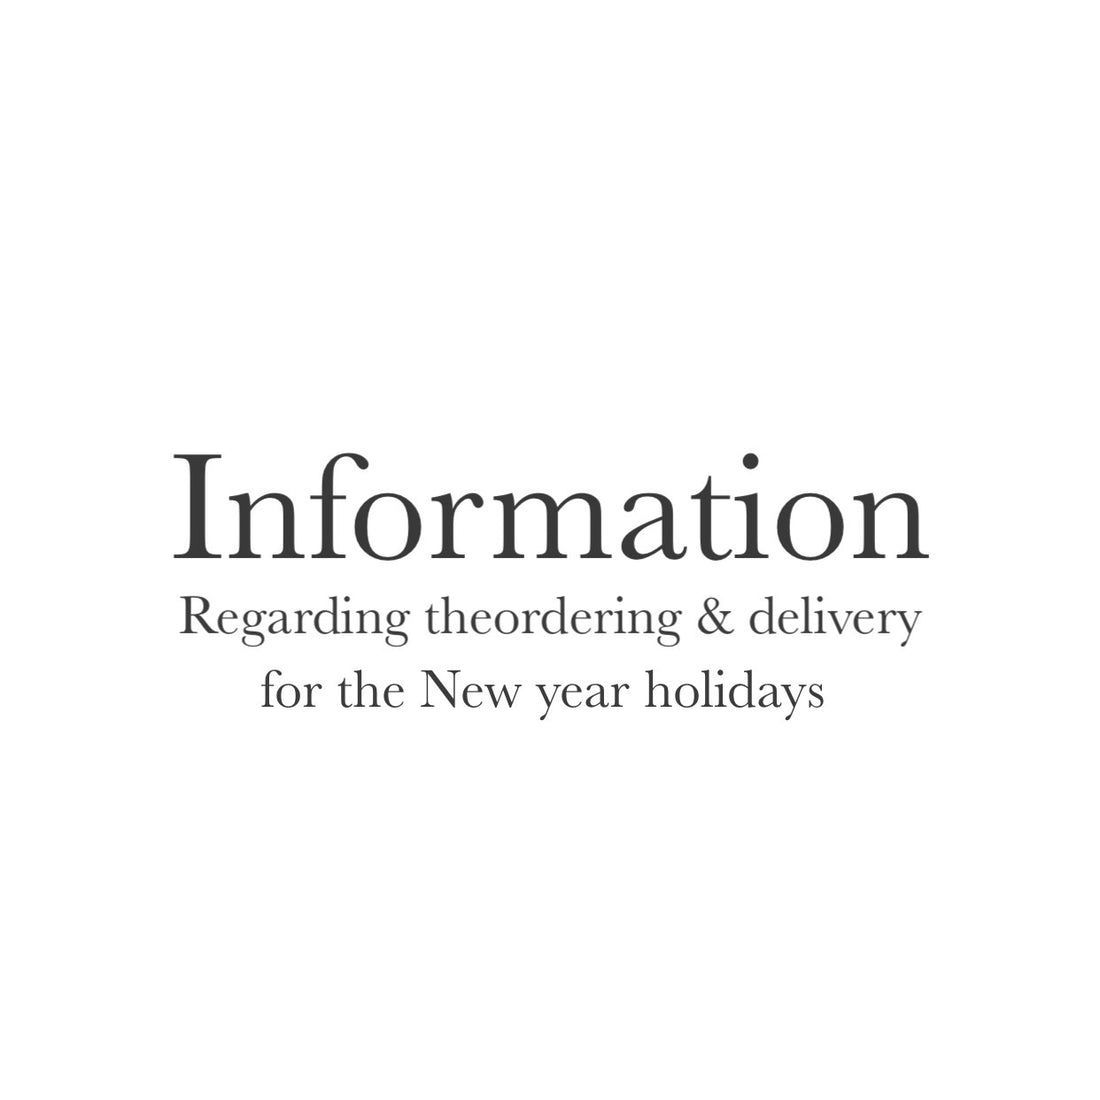 About business days for the year-end and New Year holidays